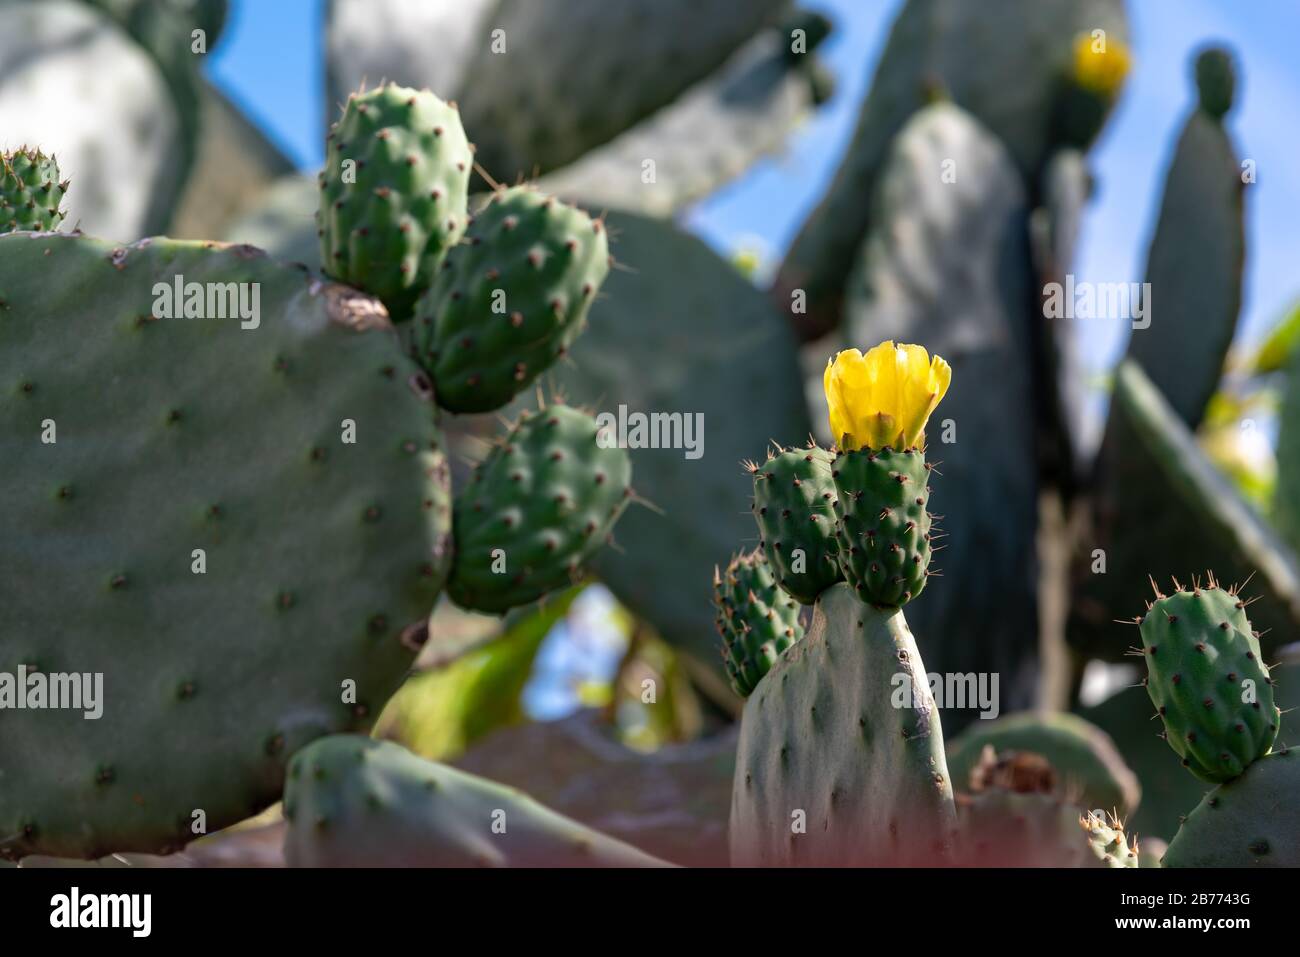 Tuna plant with a lot of buds and buds with a freshly bloomed yellow flower Stock Photo